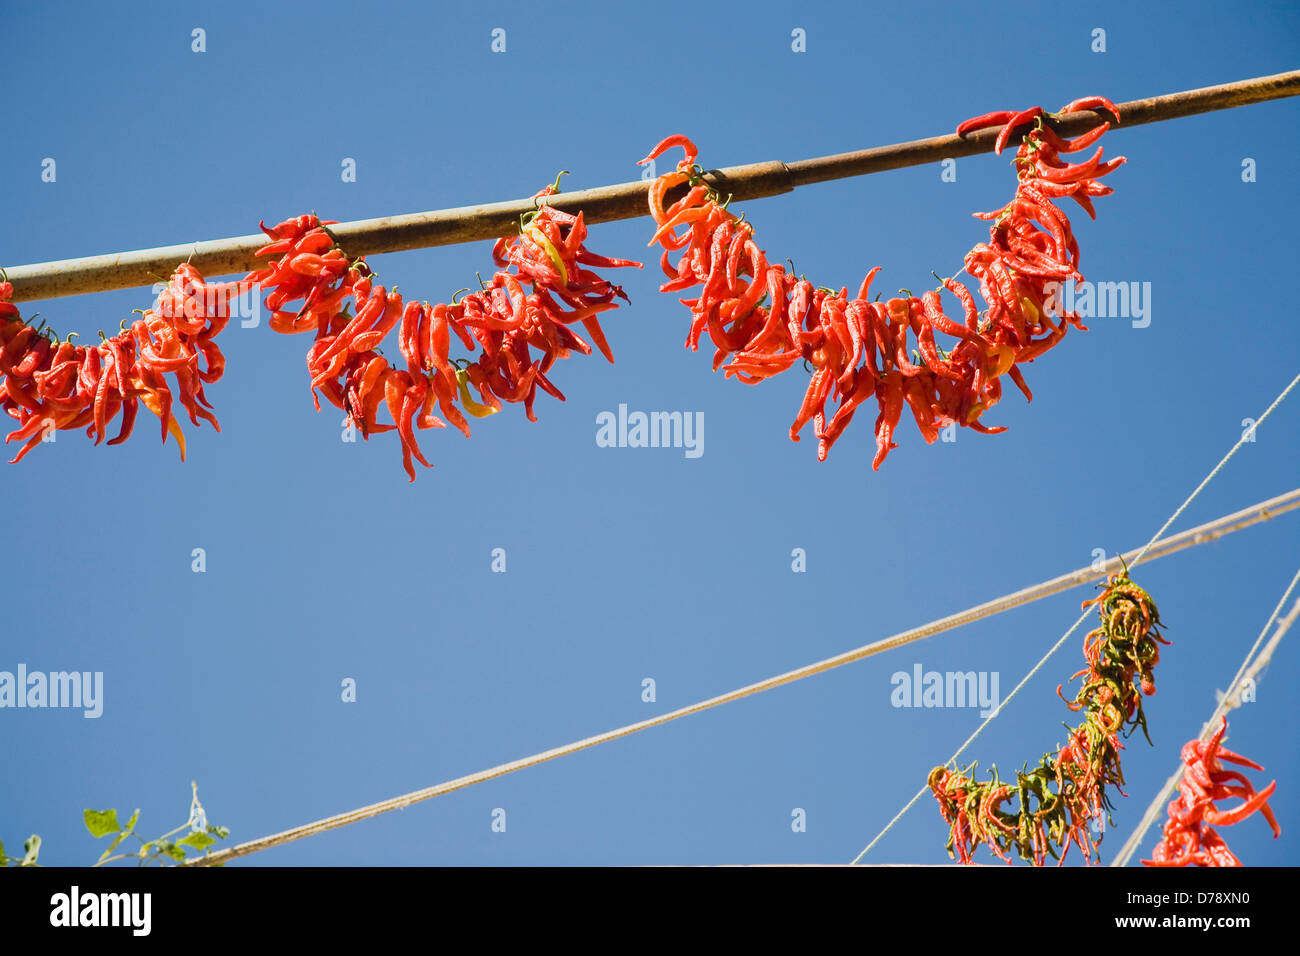 Turkey Aydin Province Kusadasi Strings of red orange chilies hanging up to dry in late afternoon summer sunshine in old town Stock Photo